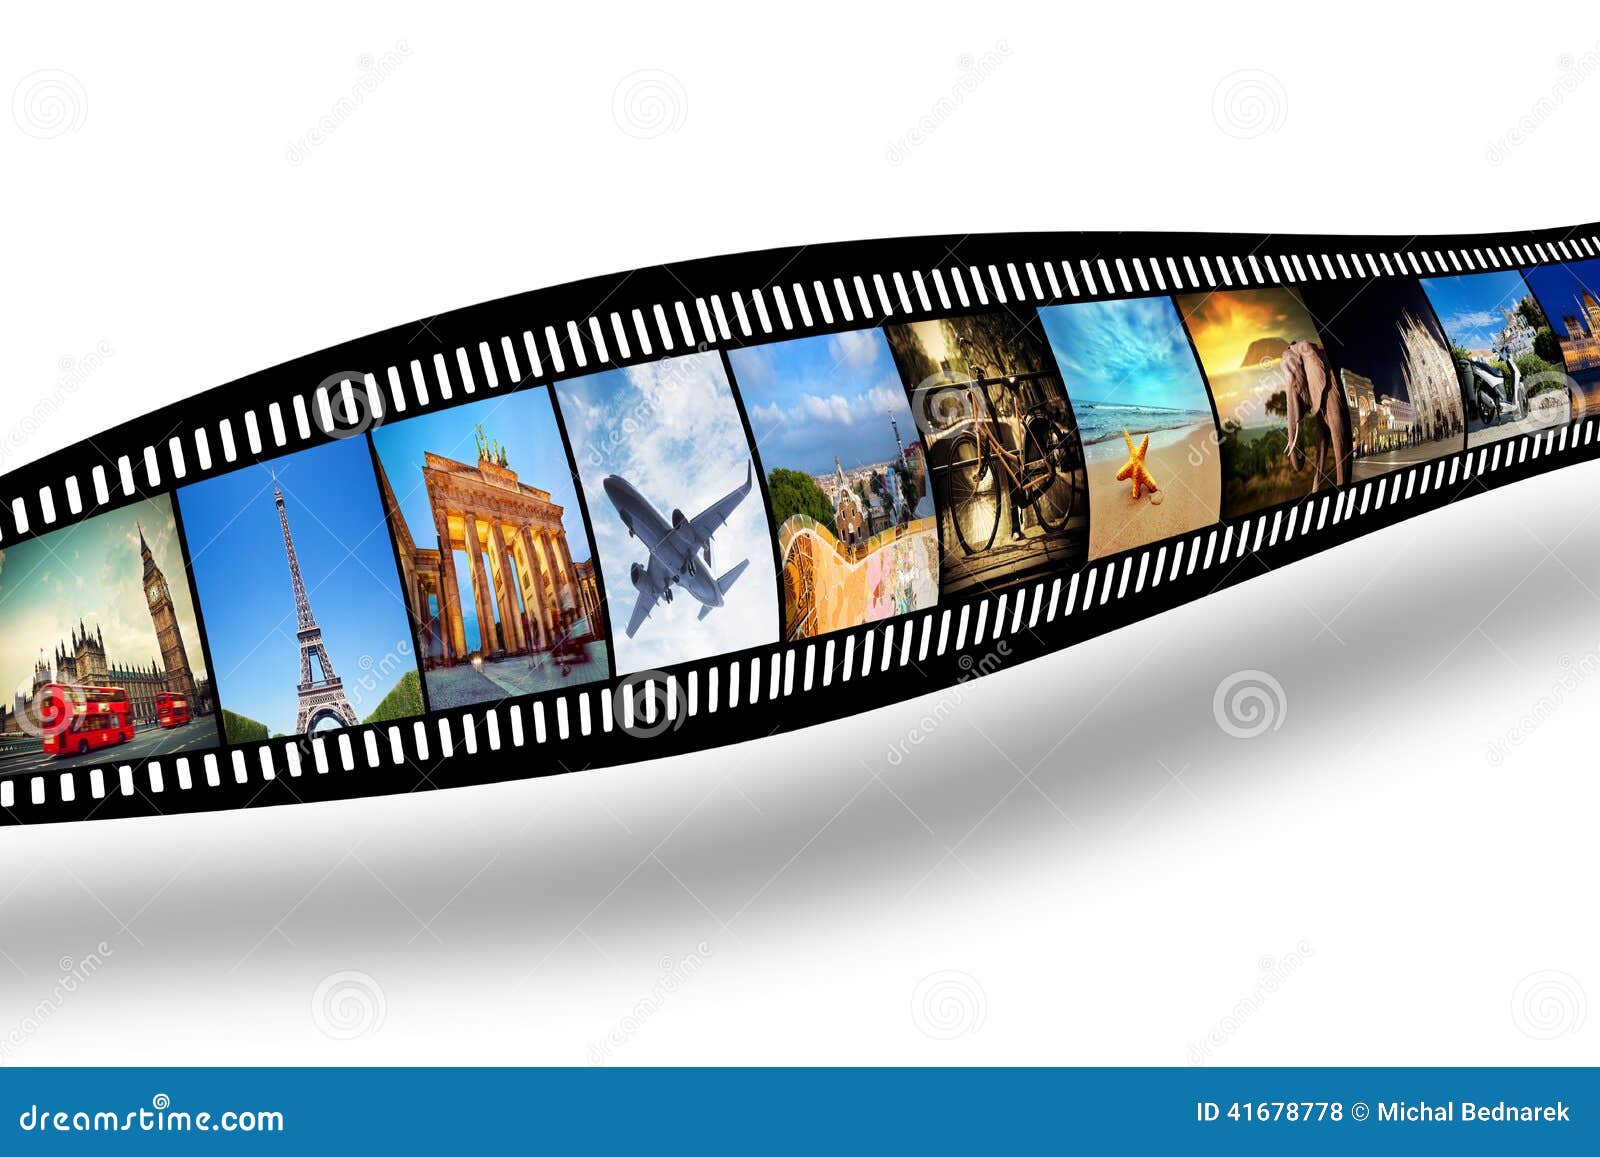 film strip with colorful, vibrant photographs. travel theme